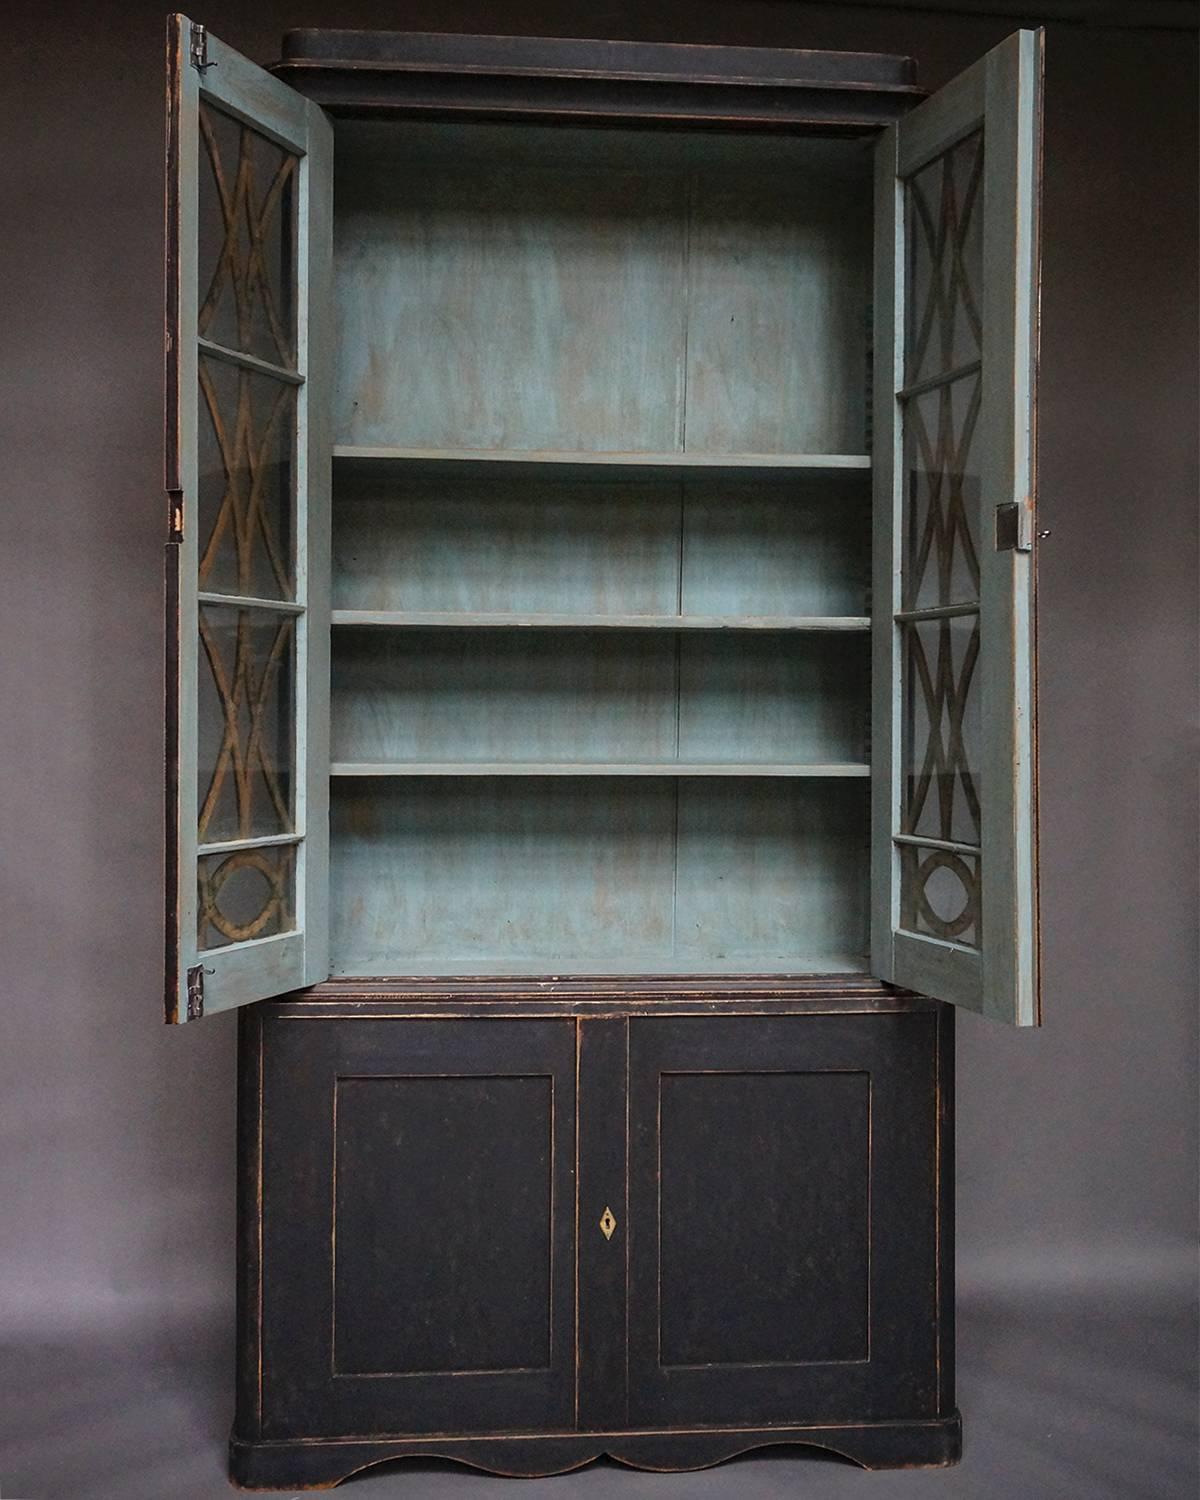 Two-part bookcase and cabinet in black paint, Sweden, circa 1830. The top section has four shelves behind double doors with the original glass. The lower section has a single shelf behind double doors, all on a shaped bracket base.